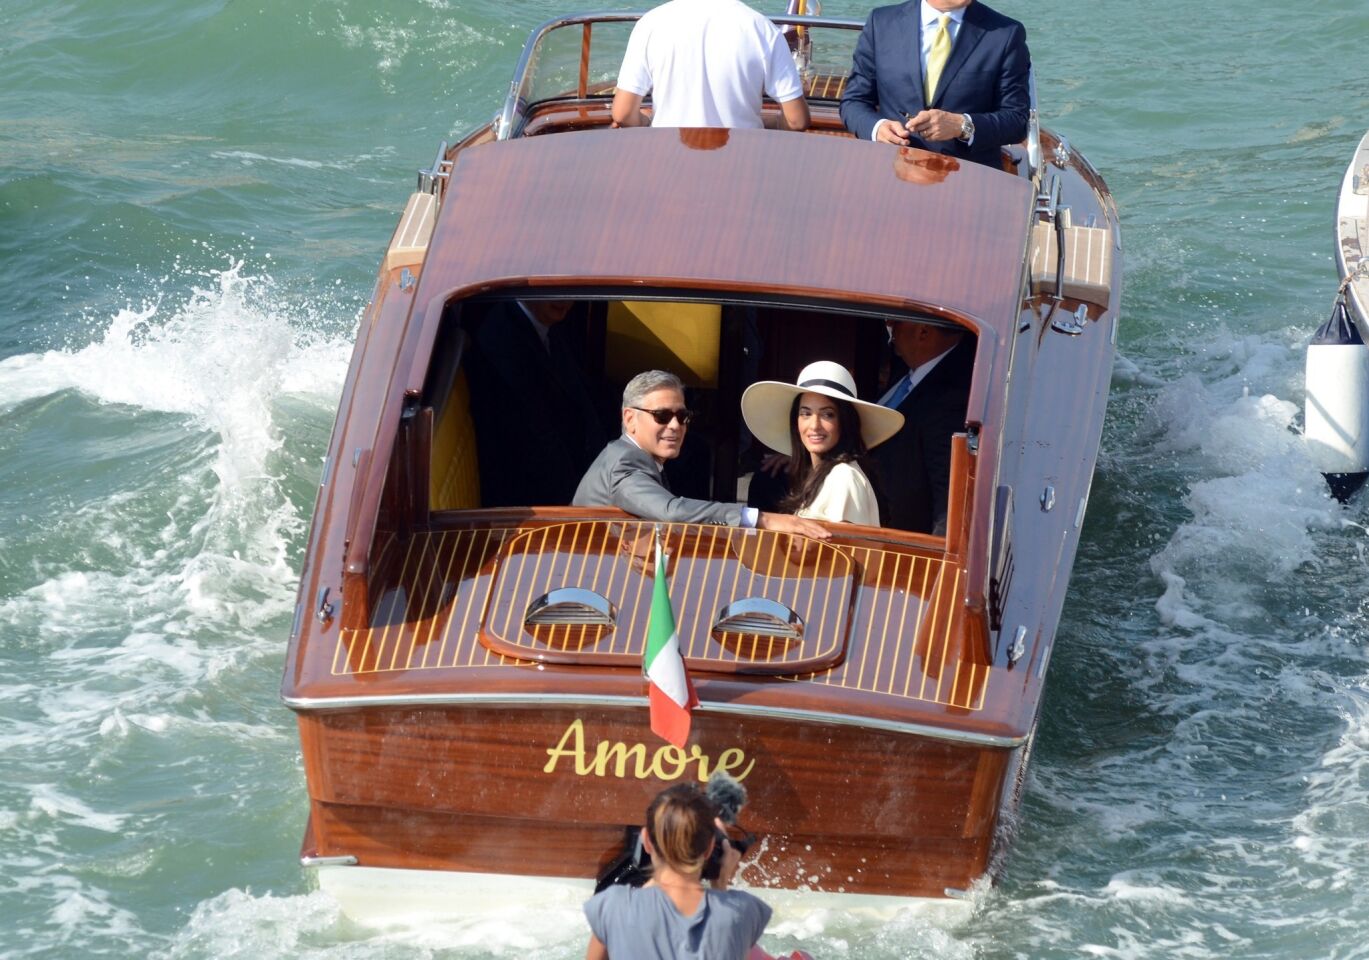 George Clooney and Amal Alamuddin are married in Venice - Los Angeles Times